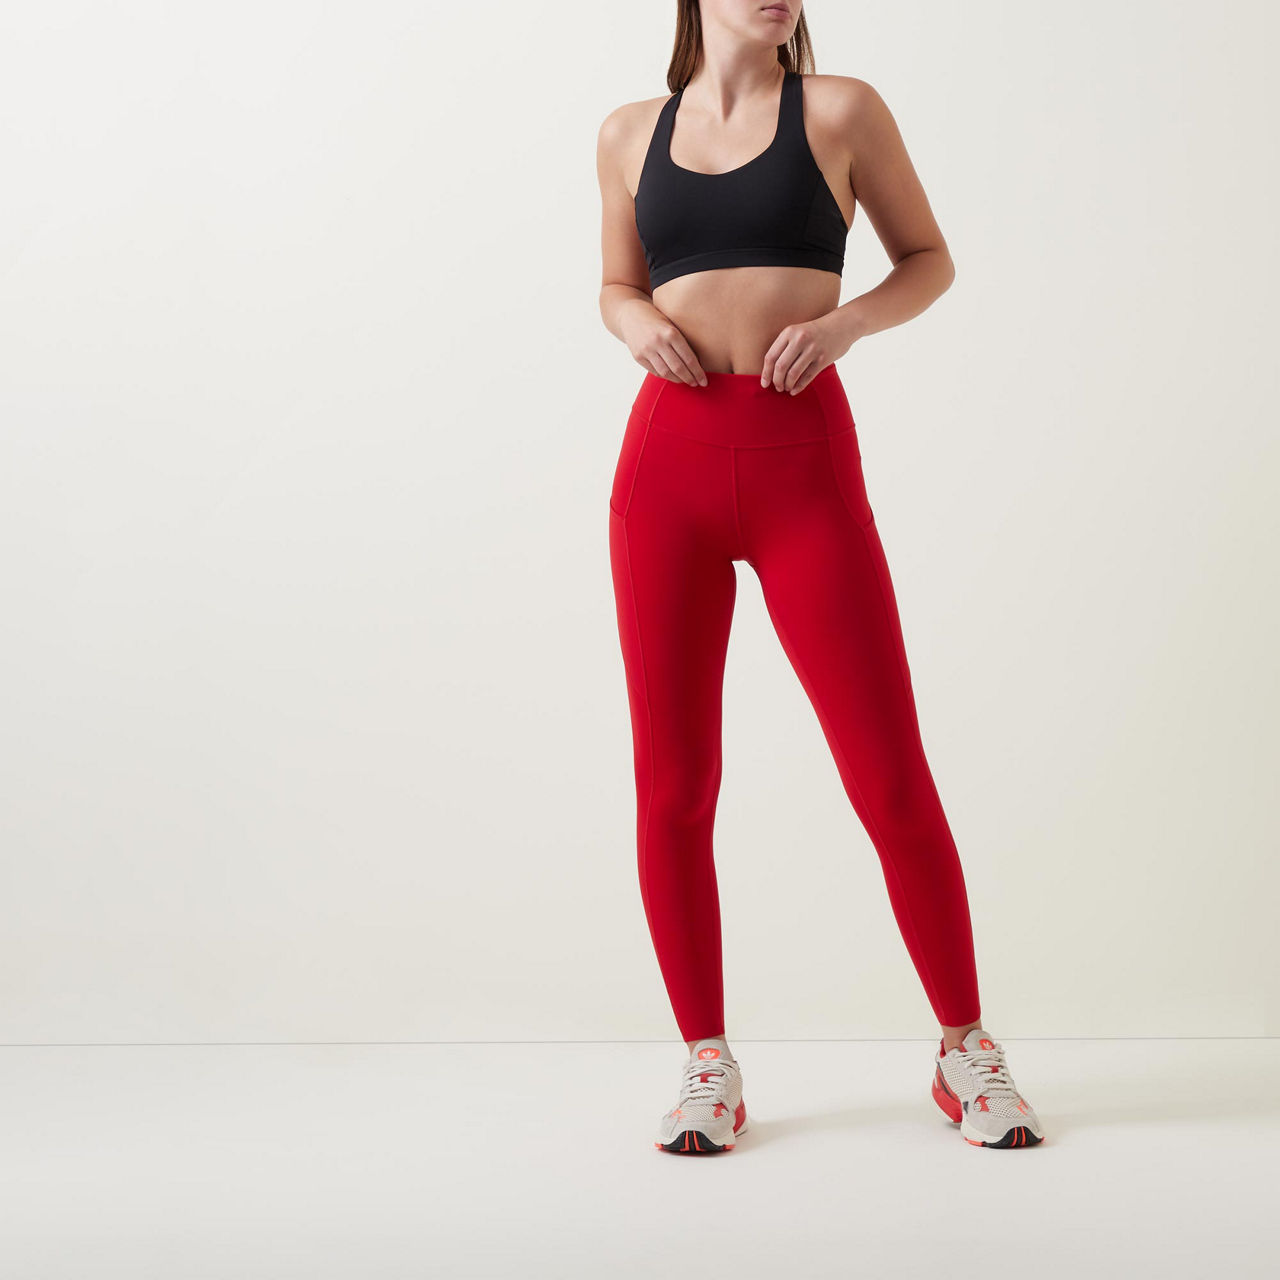 Lululemon Fast Free 25” Leggings Red Size 2 - $51 - From Gia